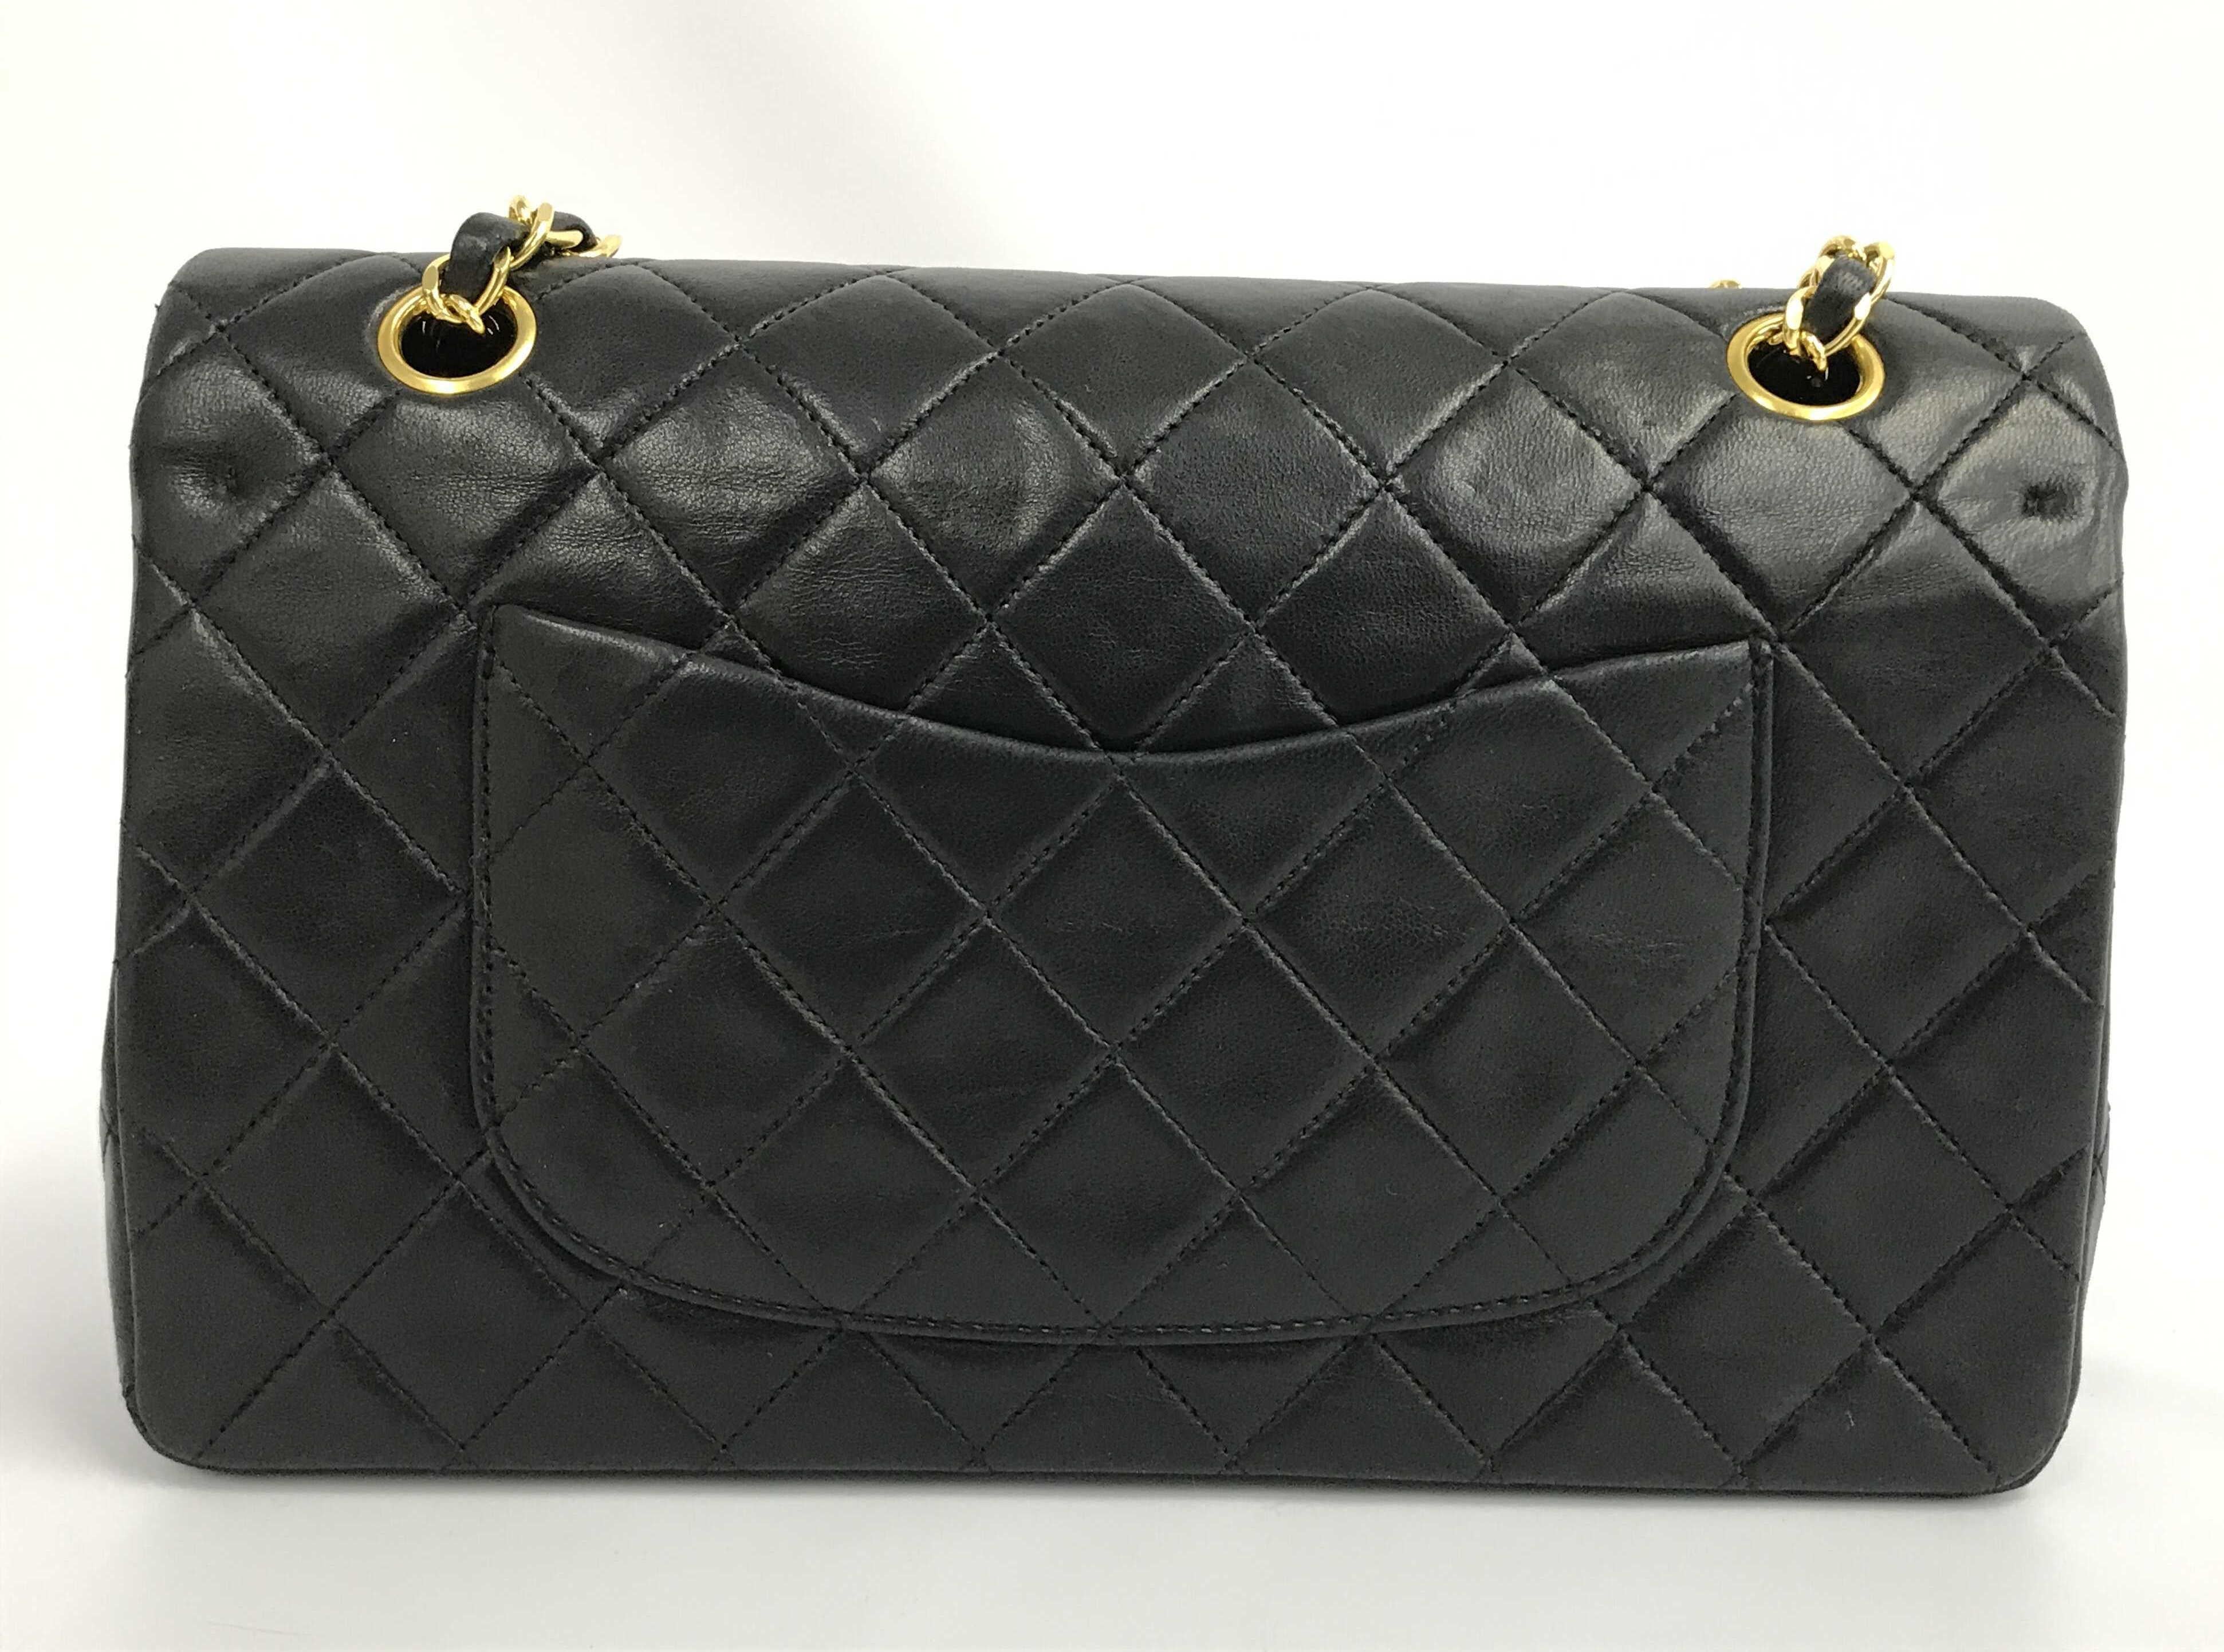 Chanel Black Quilted Lambskin Leather CC Dual Flap Shoulder Bag In Good Condition For Sale In Irvine, CA